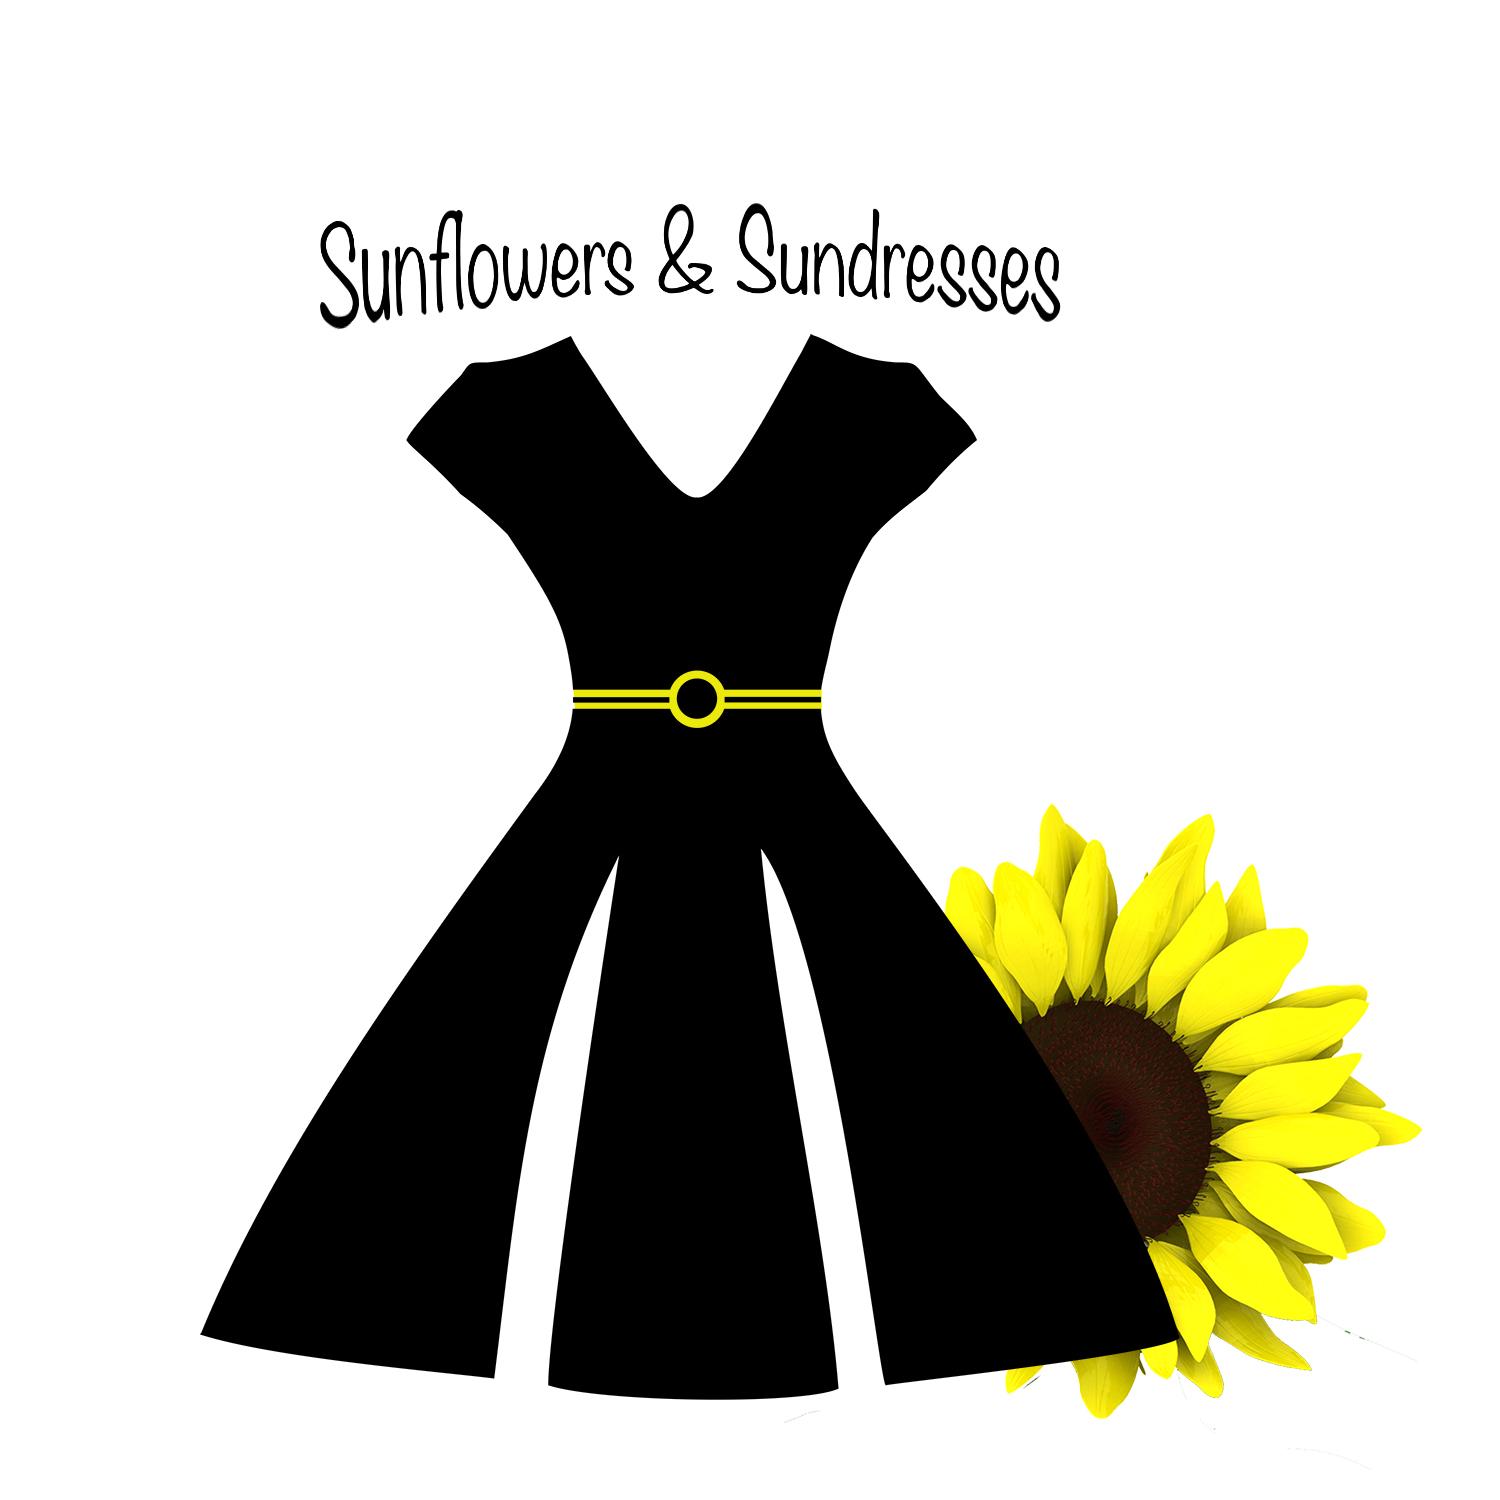 Sunflowers and Sundresses: Animal attack